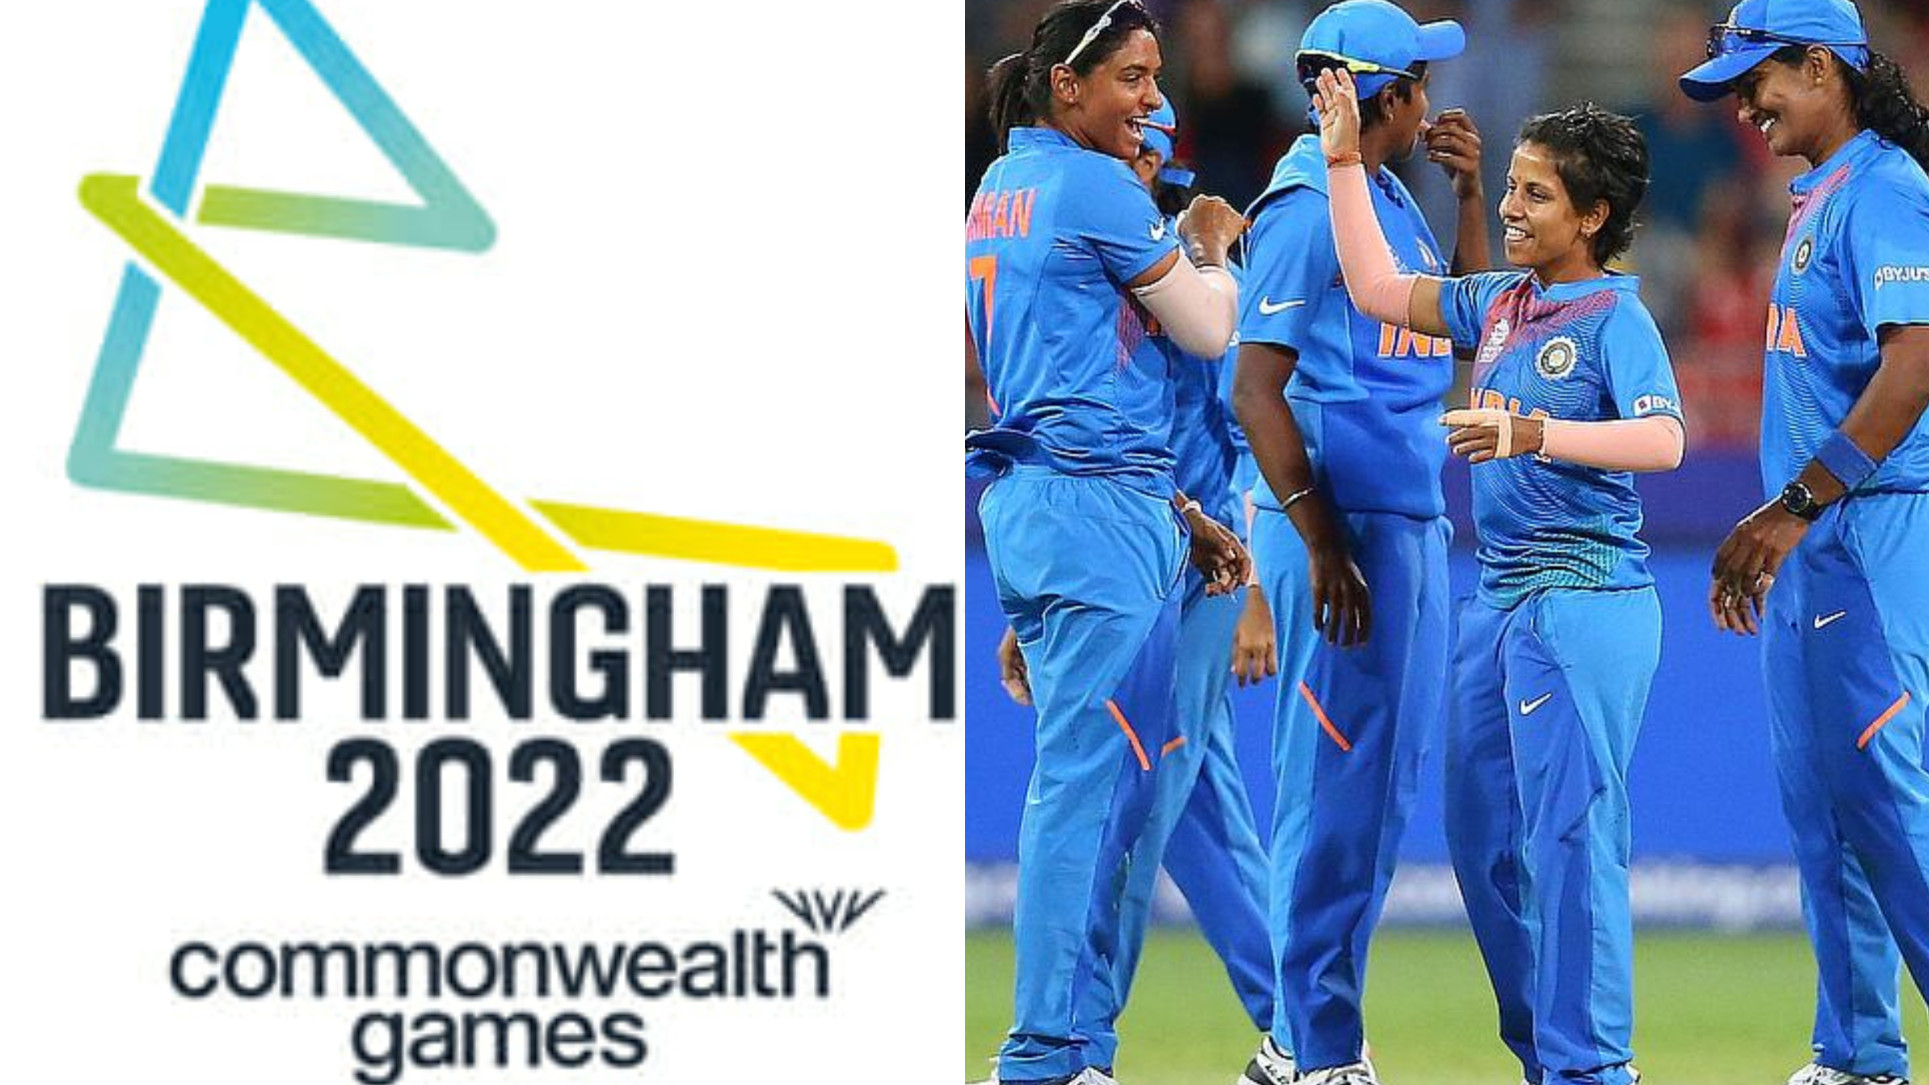 Women’s T20 competition in Commonwealth Games 2022 to be played from July 29-Aug 7